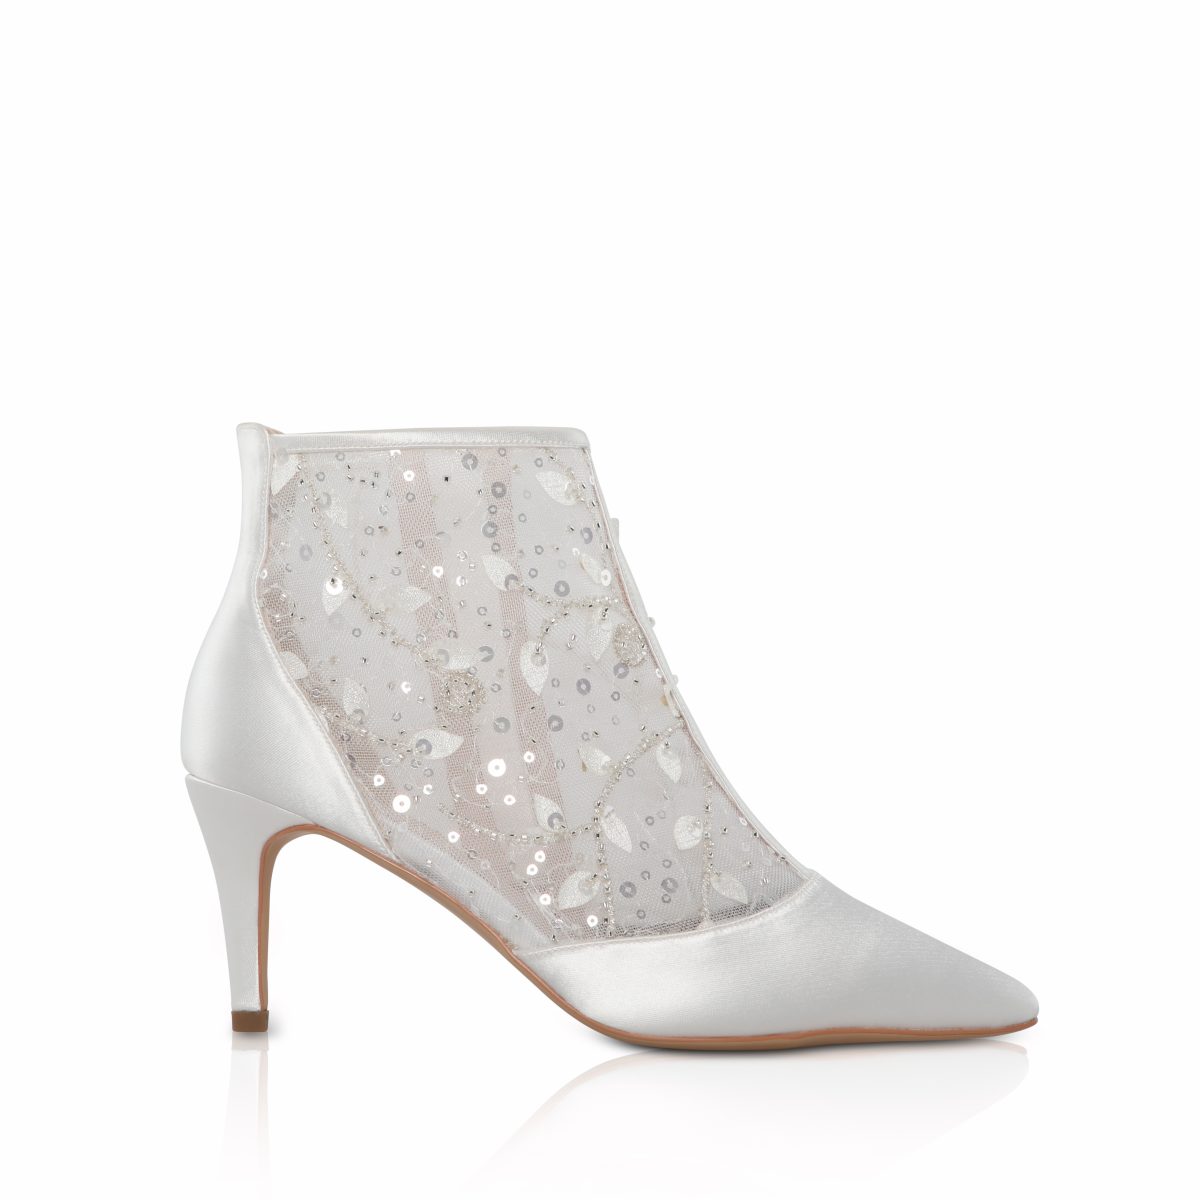 Perfect Bridal Imogen Boots - Ivory Satin /Sequin Mesh 1